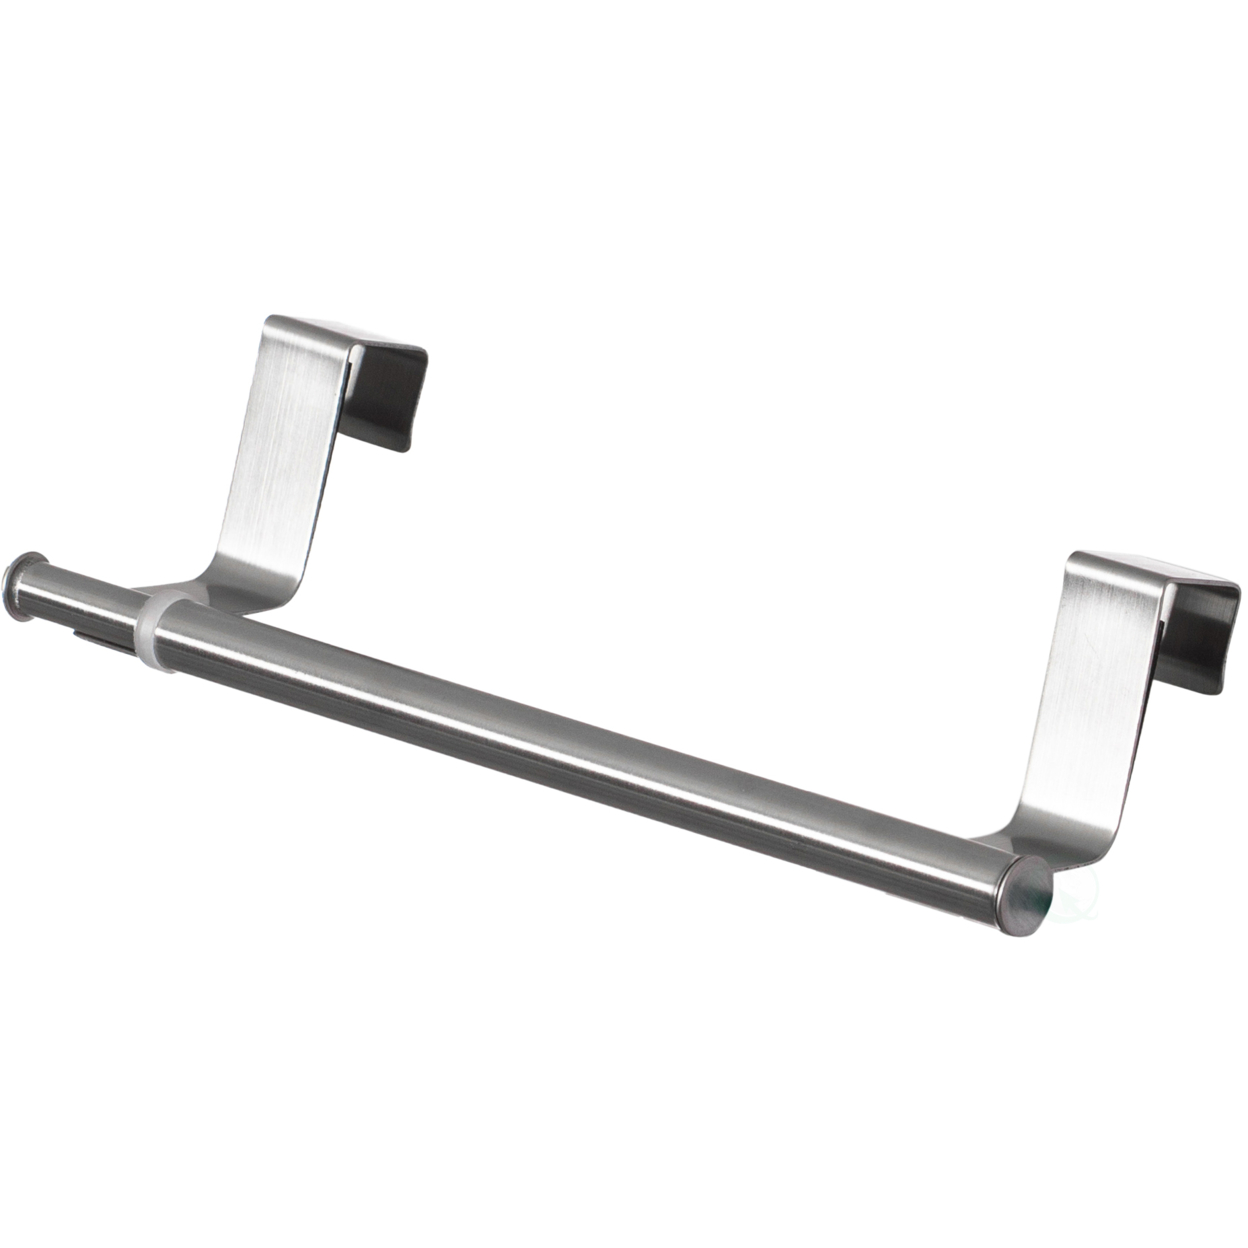 Chrome Over The Door Extendable Towel Holder Rack For The Kitchen, Vanity, And Bathroom